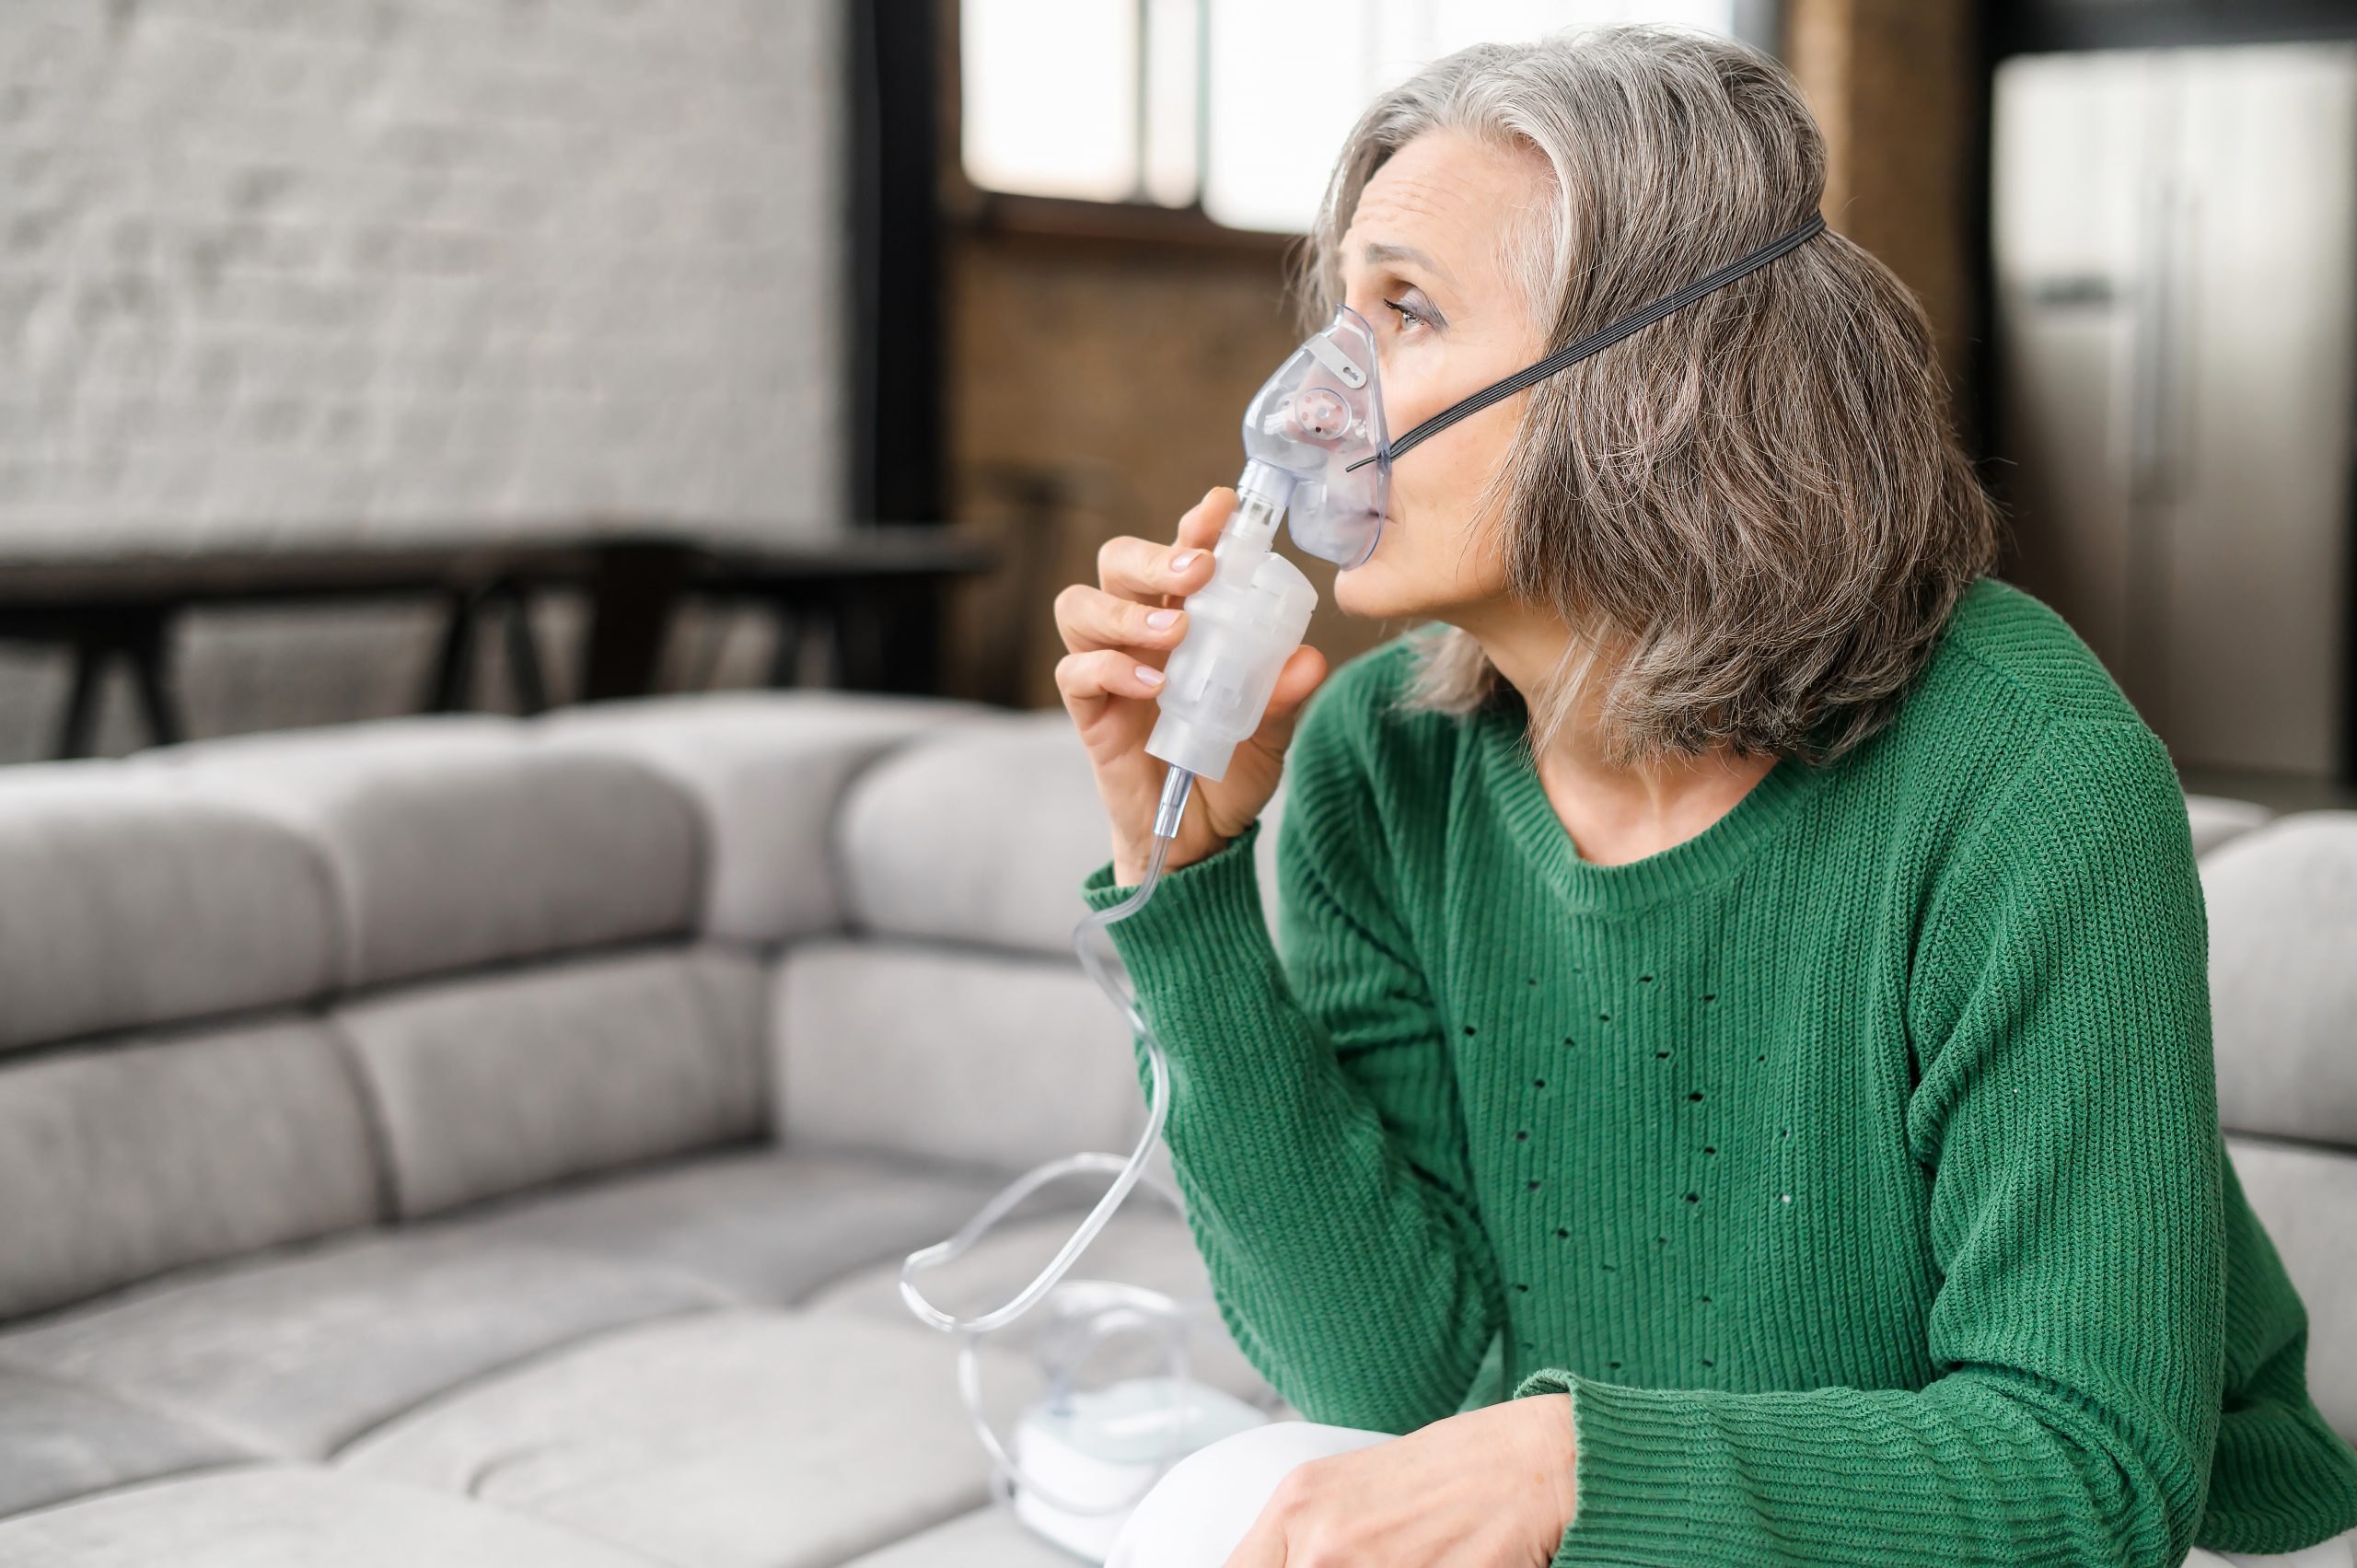 Upset senior woman feeling unwell, has shortness of breath, asthma, using oxygen mask sitting on the couch at home. Sick mature woman makes inhalation with a nebulizer at home, treating herself